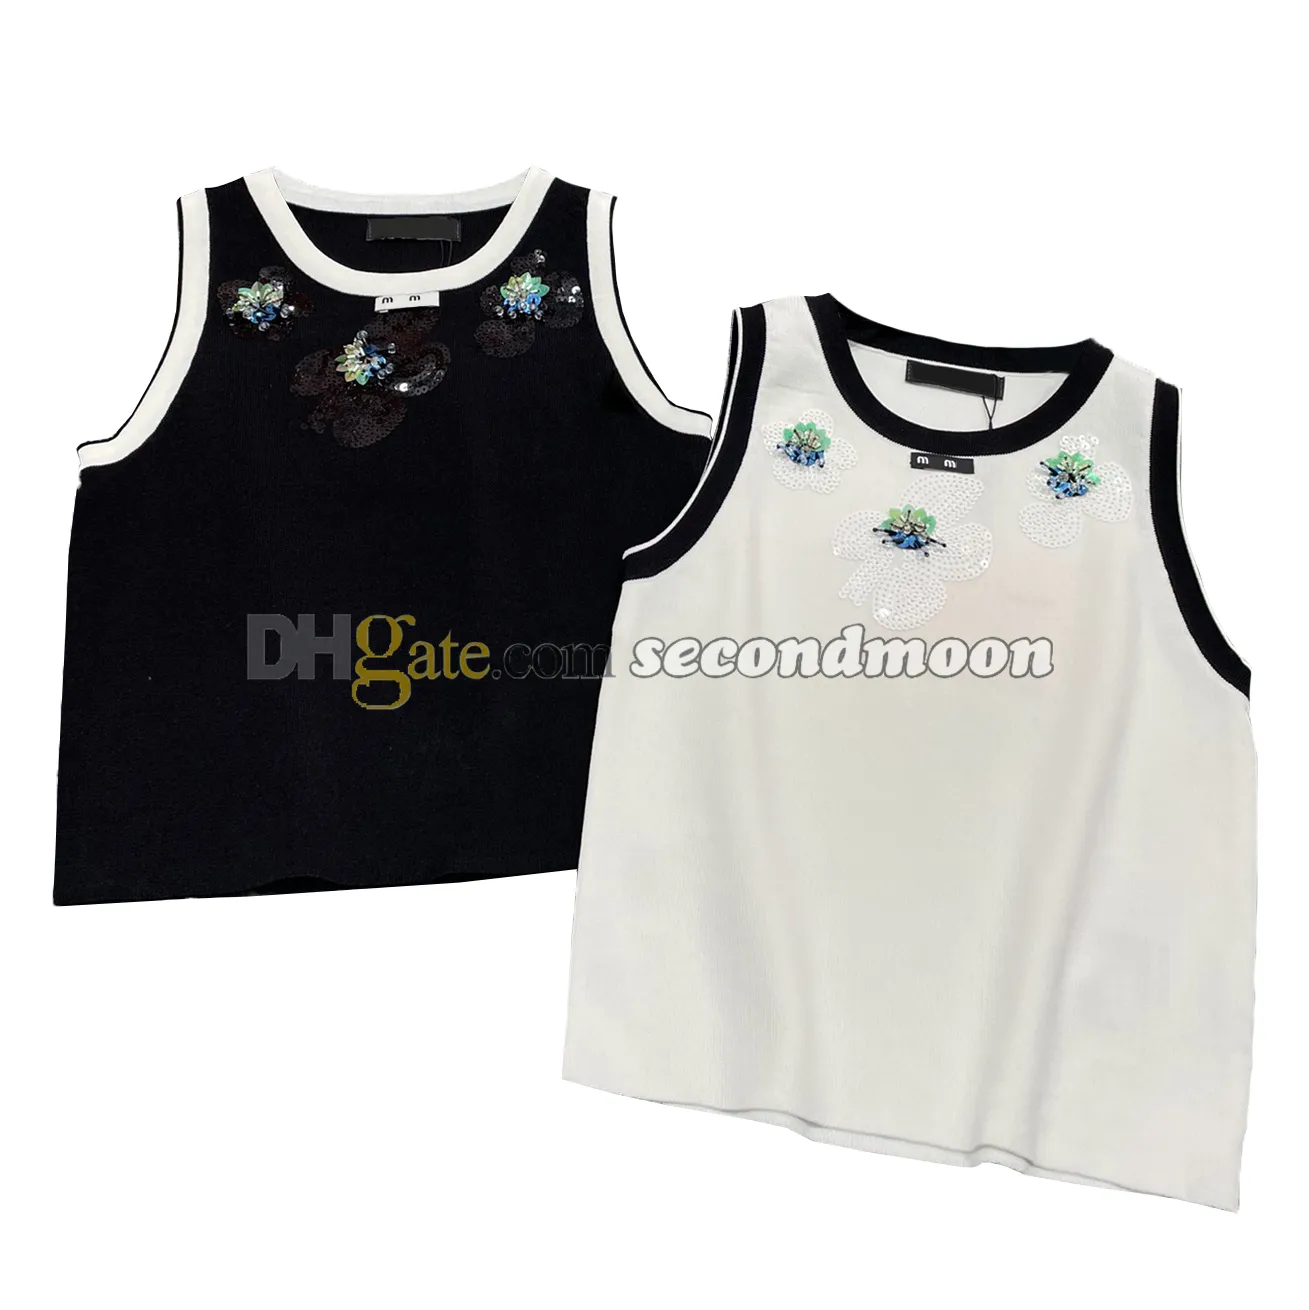 Shiny Sequin Tanks Top Women Crew Neck Vest Quick Drying Sport Vests Casual Style Fitness Tees